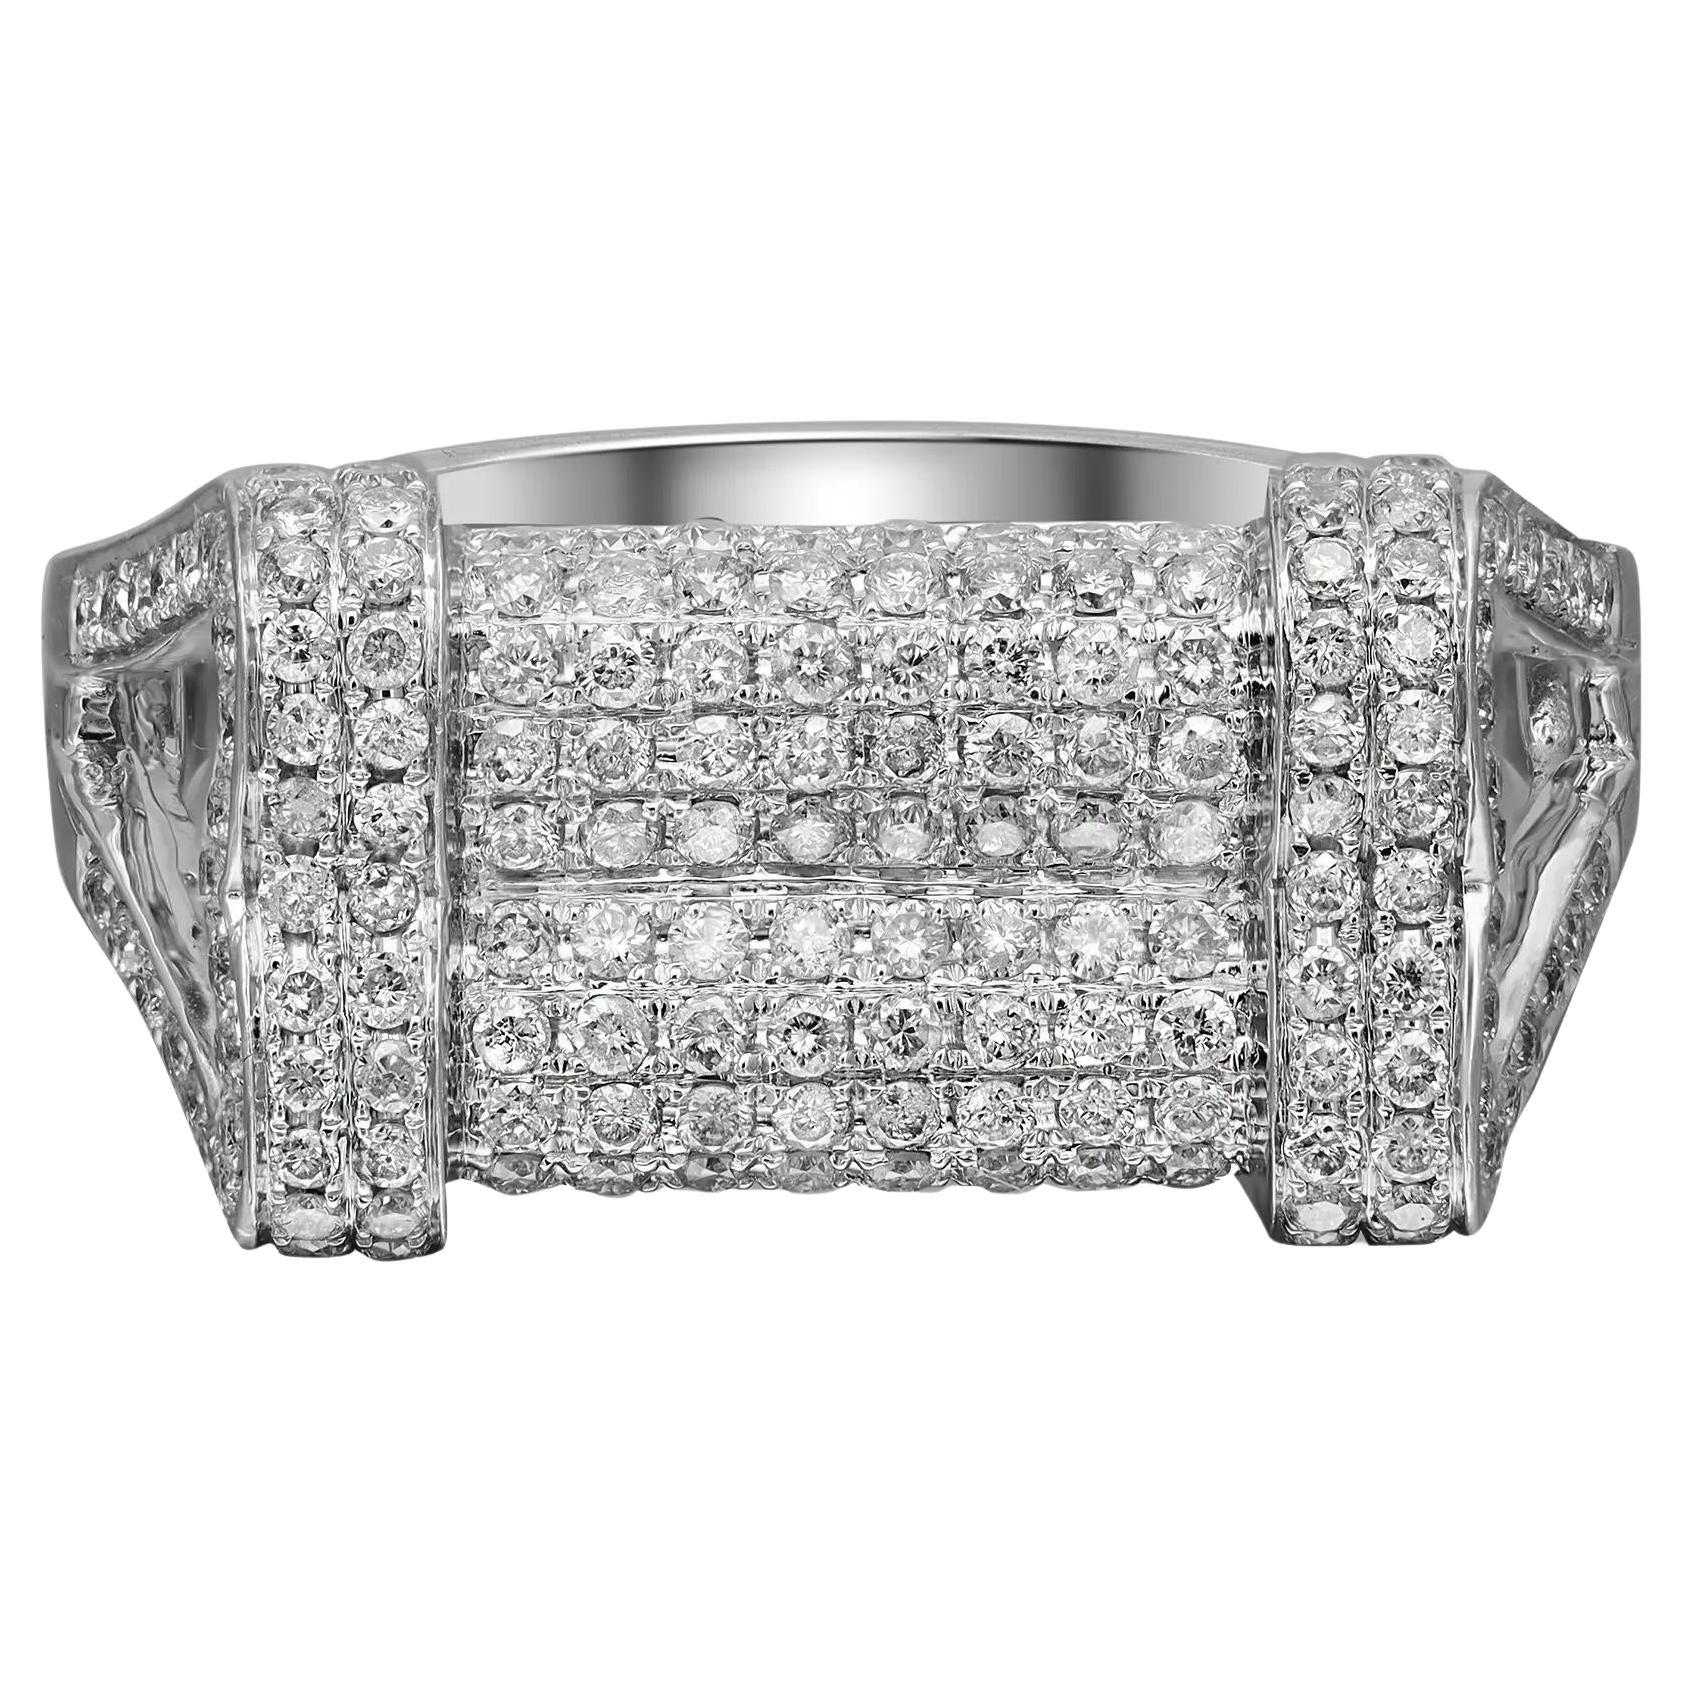 1.28cttw Pave Set Round Cut Diamond Cocktail Ring 14k White Gold For Sale